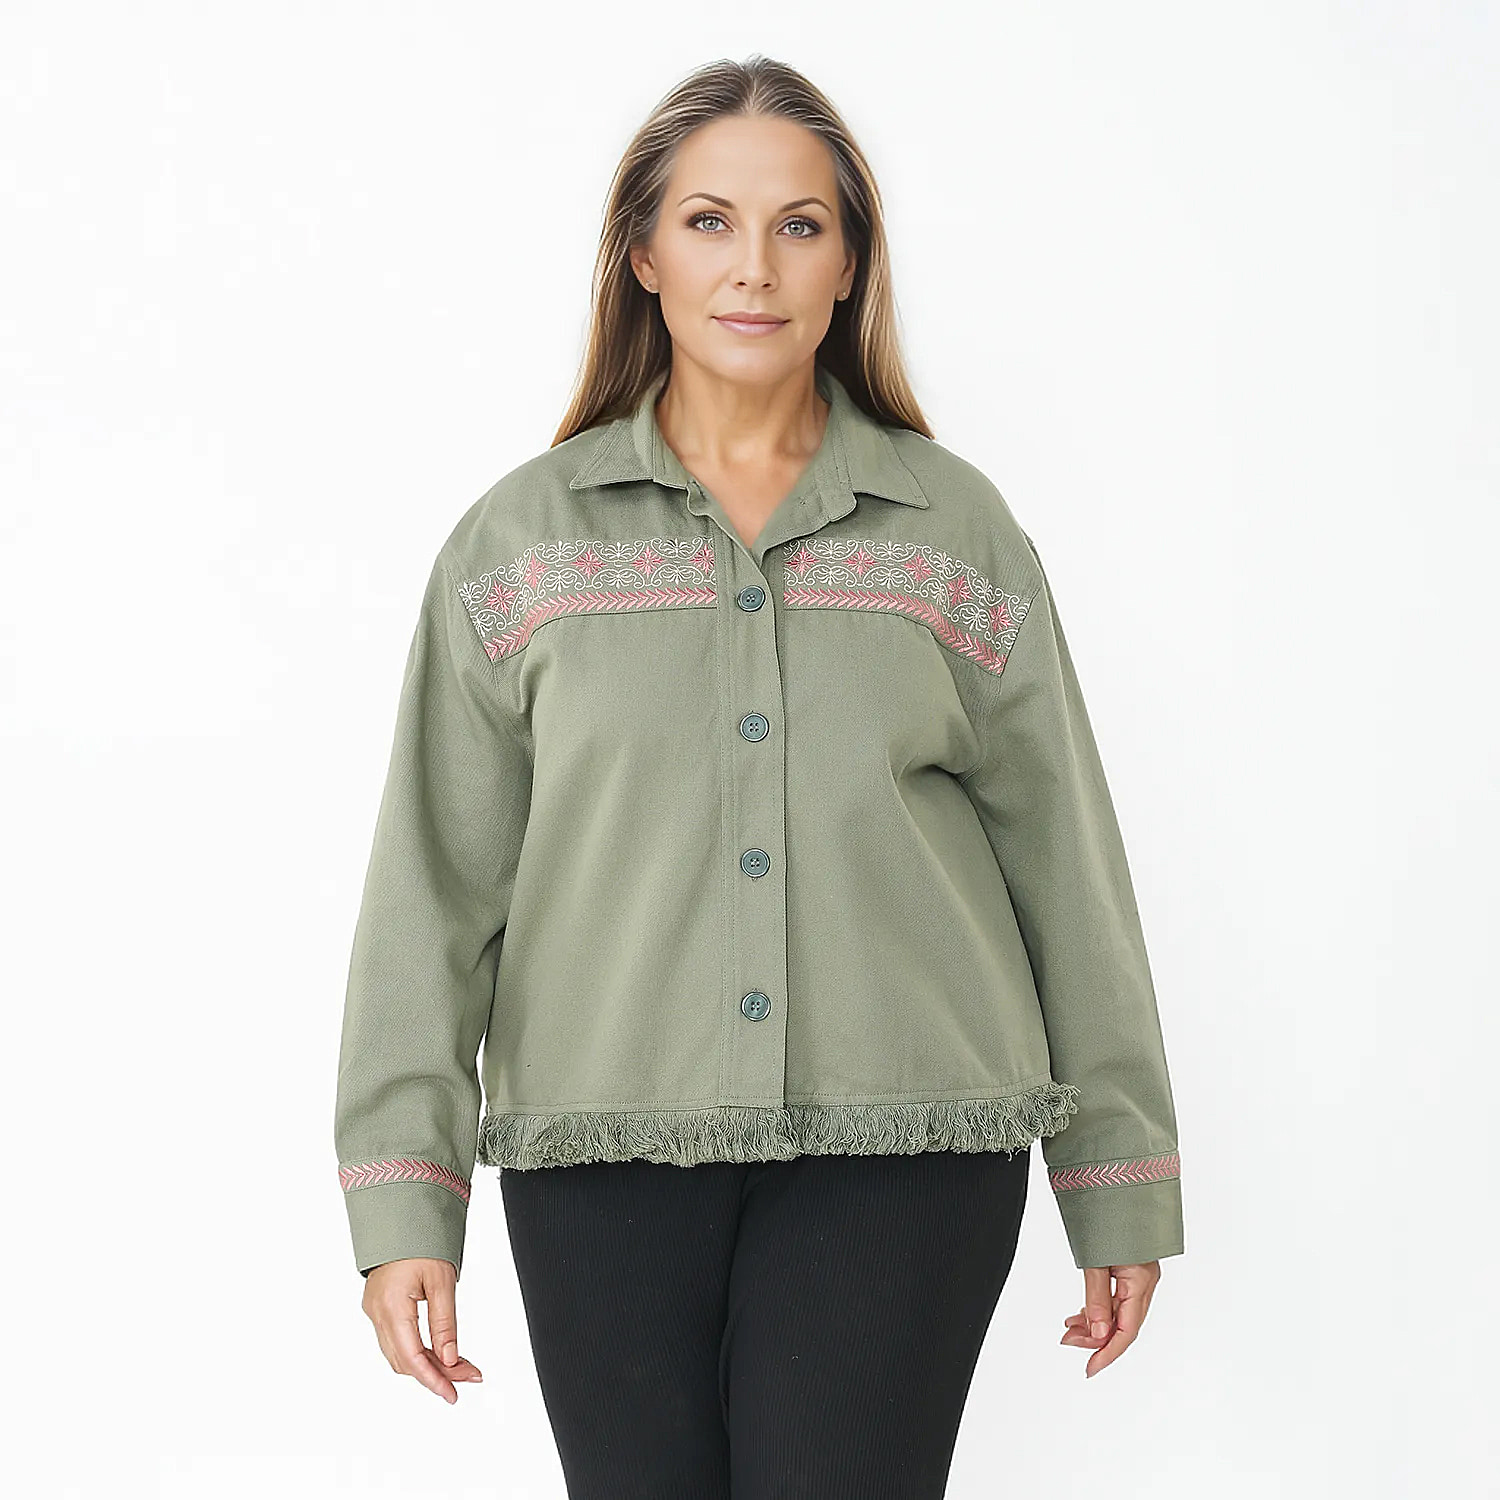 Tamsy 100% Cotton Embroidered Jacket (Size S,8-10) - Moss Green